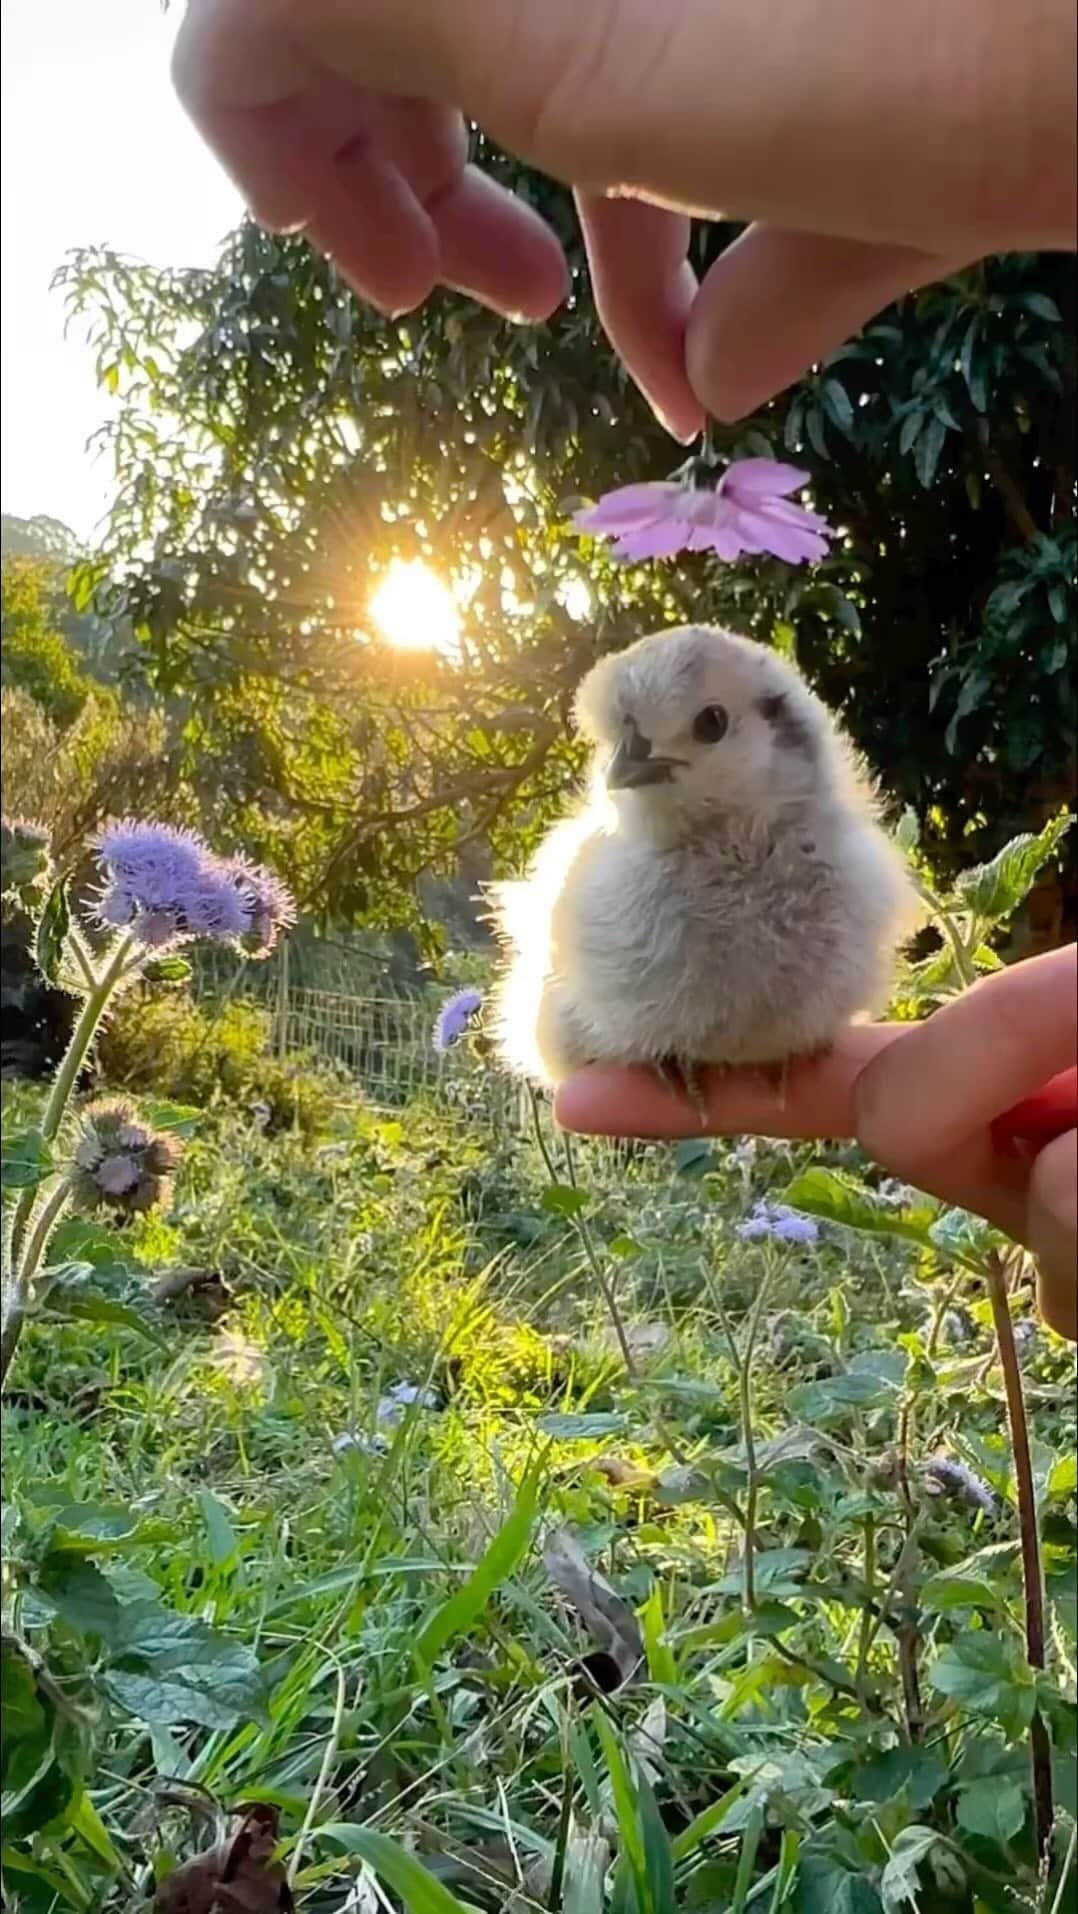 Cute baby animal videos picsのインスタグラム：「Adorable 🥰  Song : YOU AND ME @skars check it out - - Follow us @cutie.animals.page for more !! 💙 - - Credit 📸 @motherthemountain DM for removal)🙏🏻 - - #animals #nature #animal #pets #love #cute #wildlife #pet #cats #dog #photography #dogs #instagram #cat #naturephotography #of #photooftheday #dogsofinstagram #animallovers #wildlifephotography #petsofinstagram #birds #catsofinstagram #instagood #petstagram #art #animalsofinstagram #puppy #bird #bhfyp」